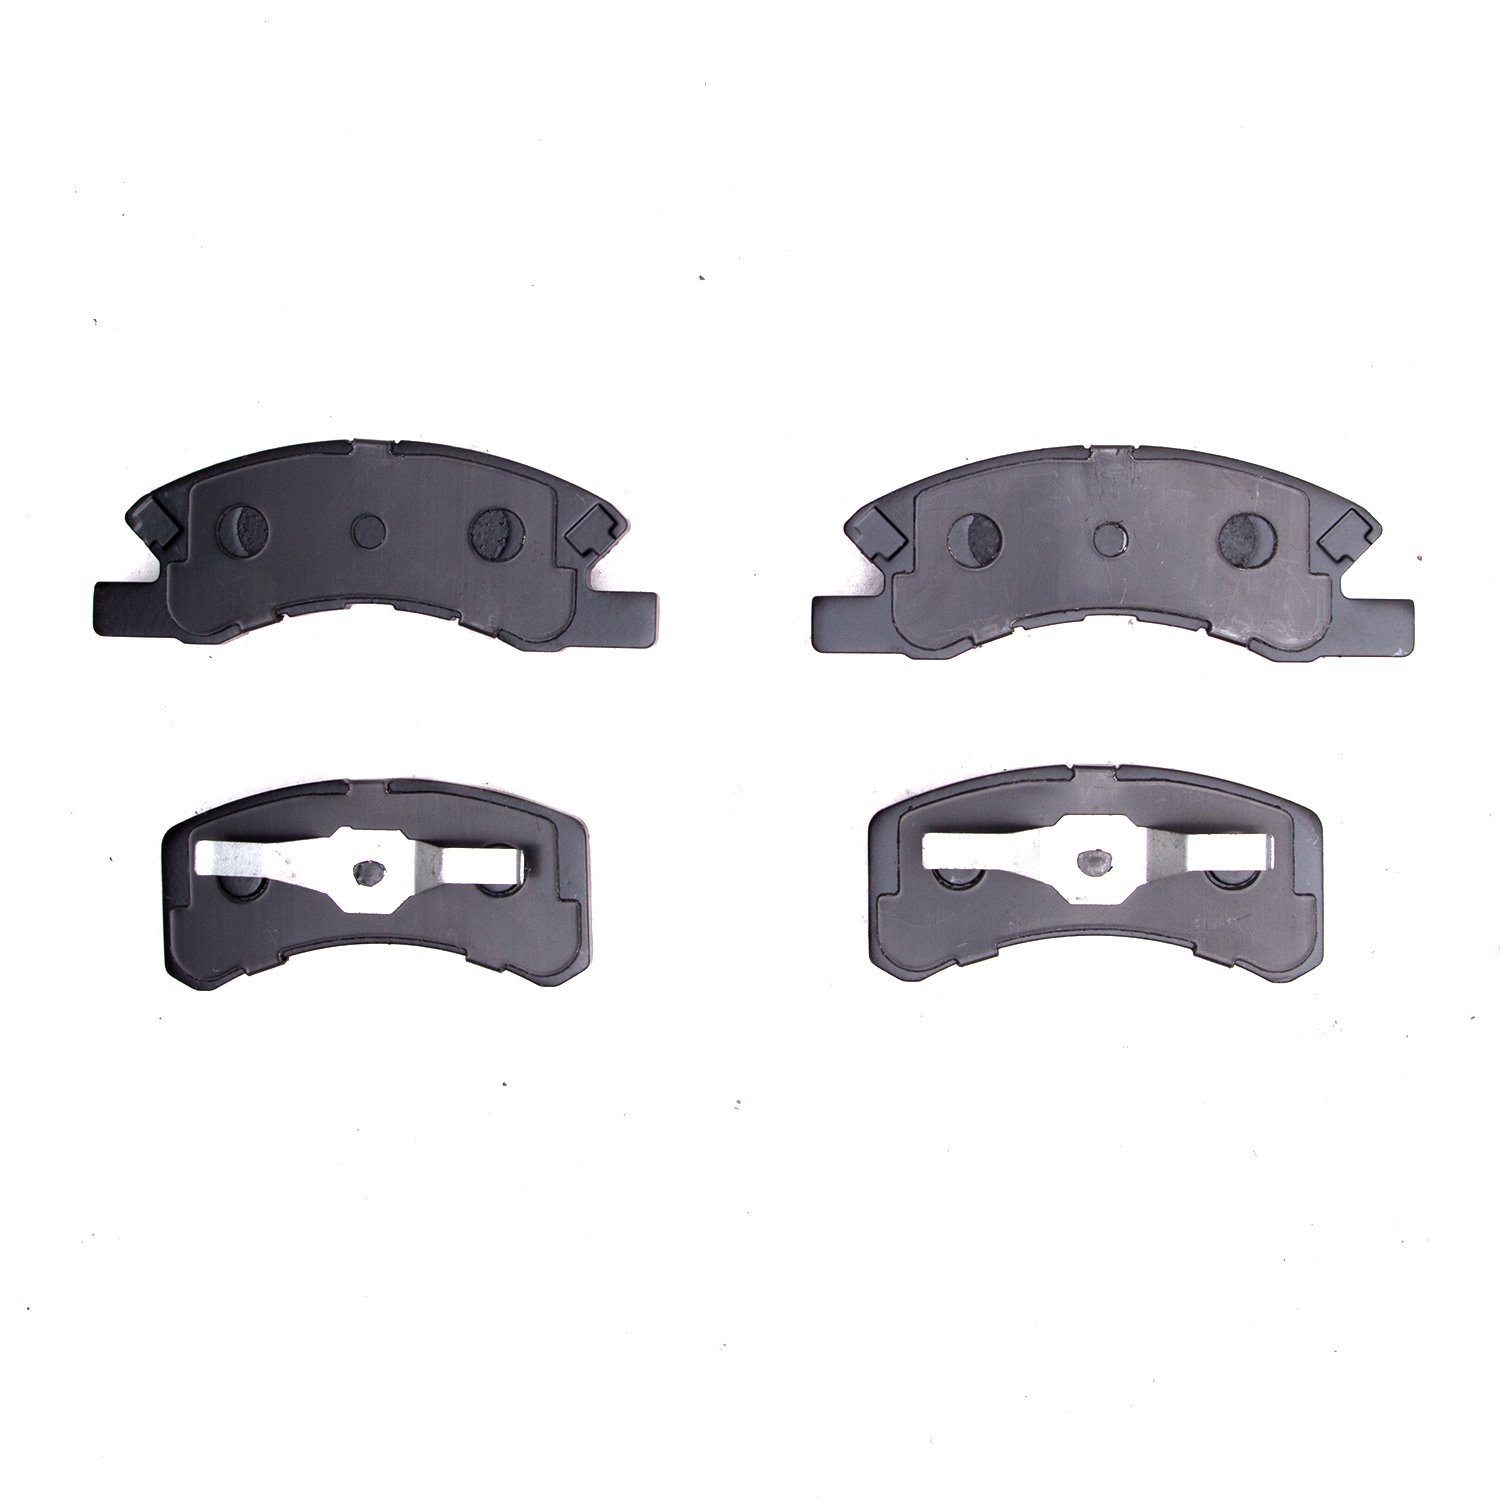 1310-1731-00 3000-Series Ceramic Brake Pads, Fits Select Multiple Makes/Models, Position: Front